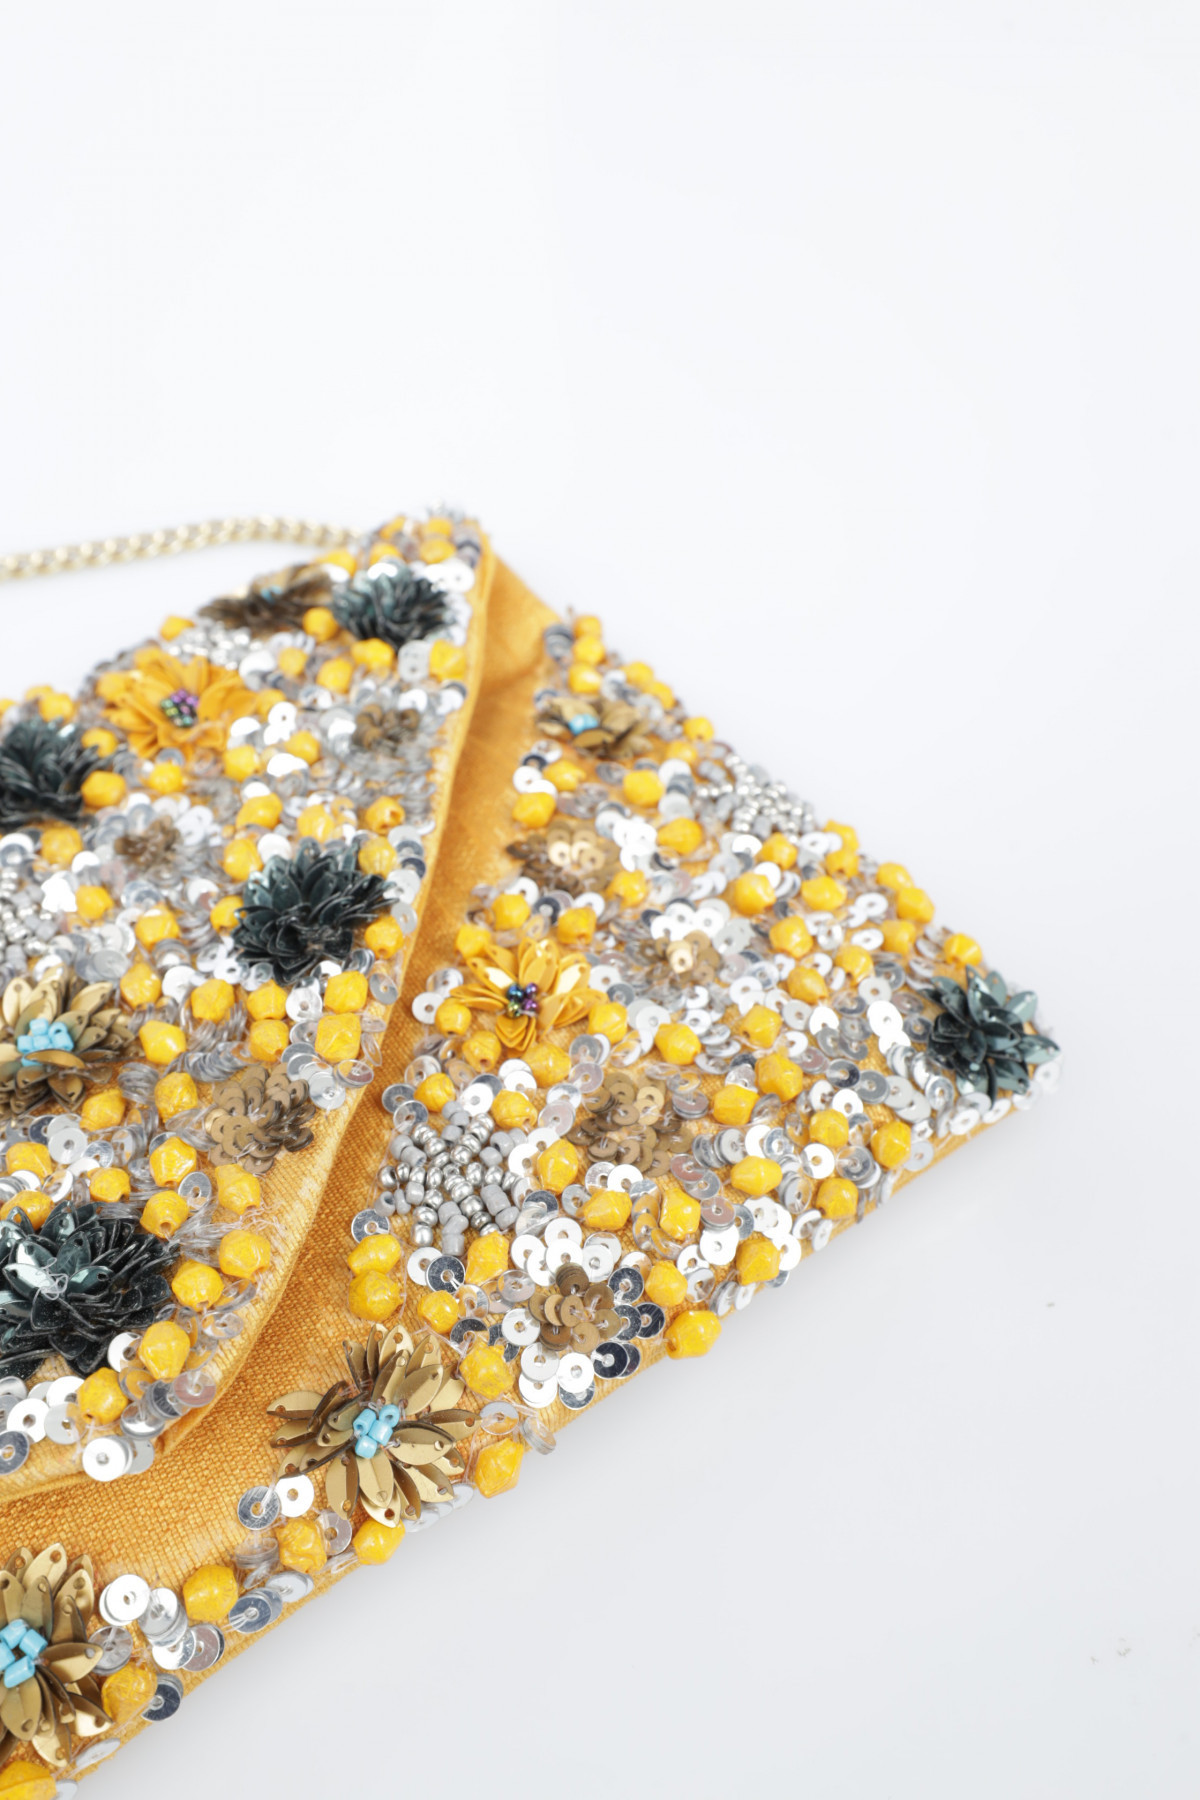 Envelope Clutch Bag with Sequins + Beads Application